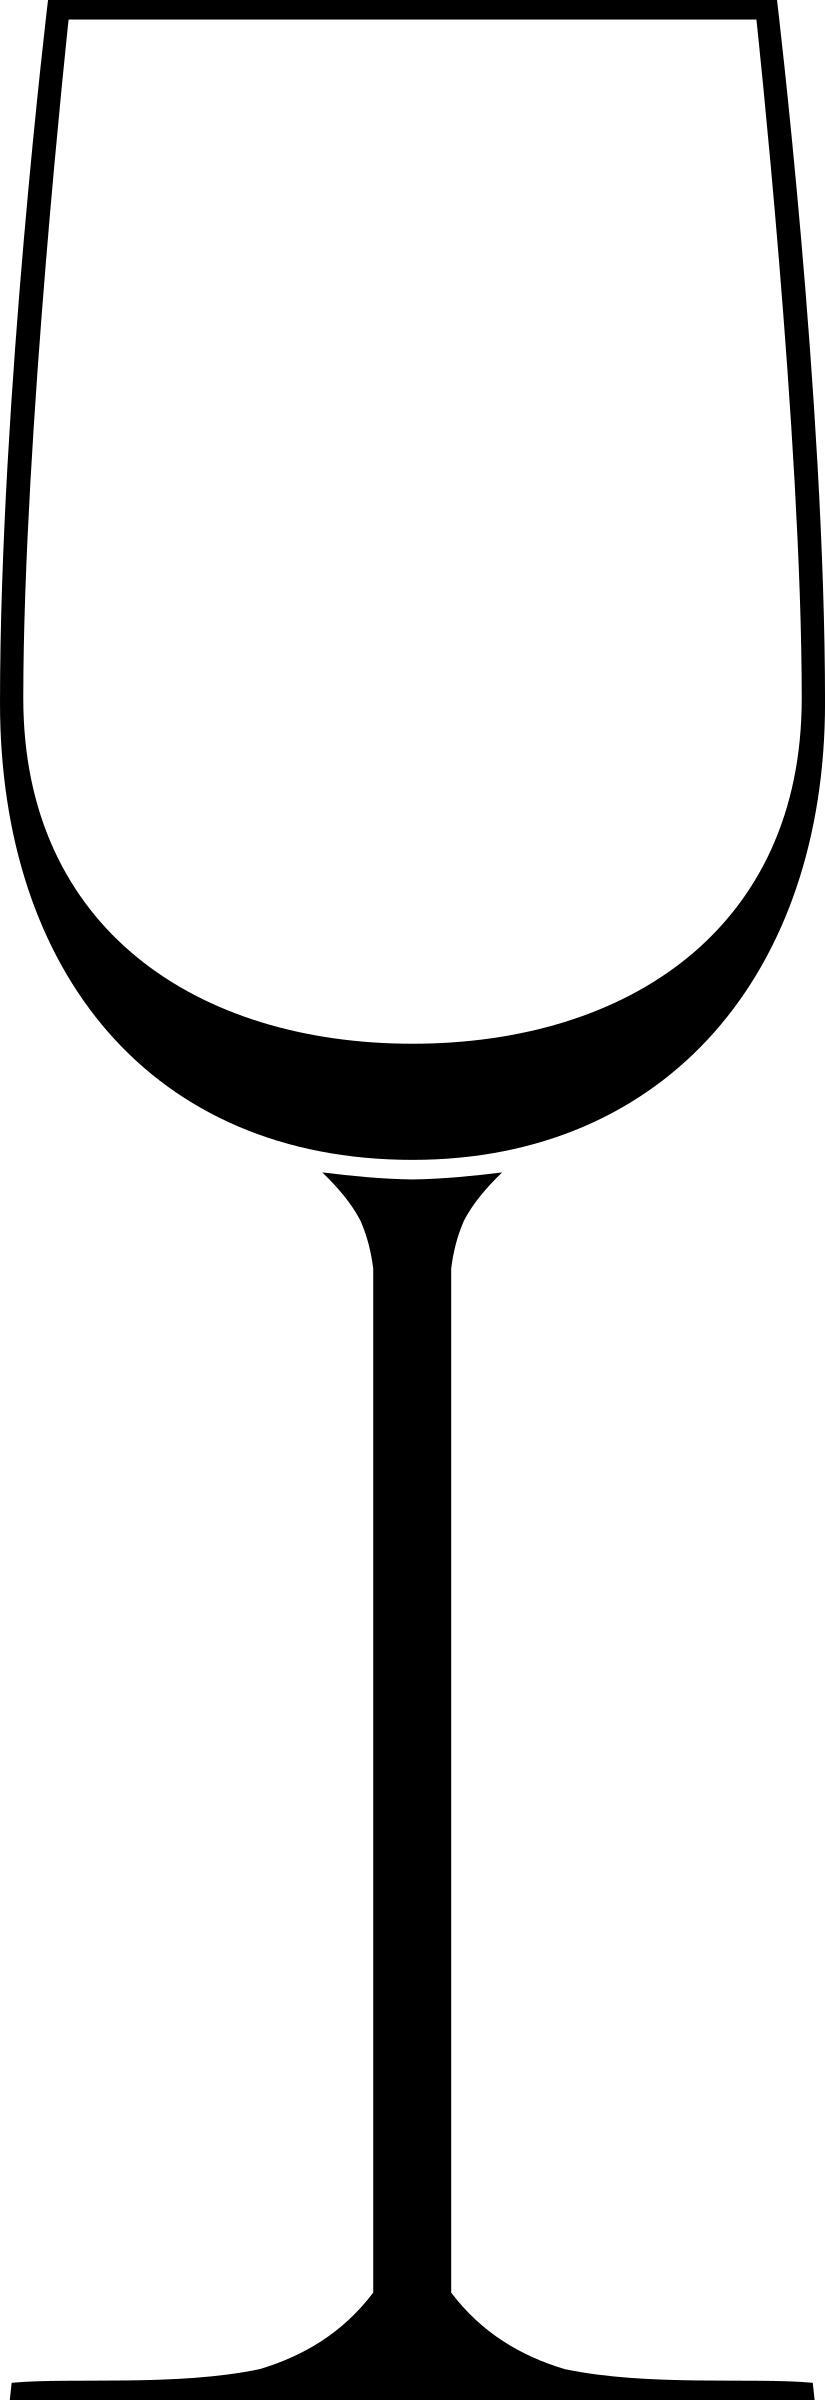 White wine glass png transparent